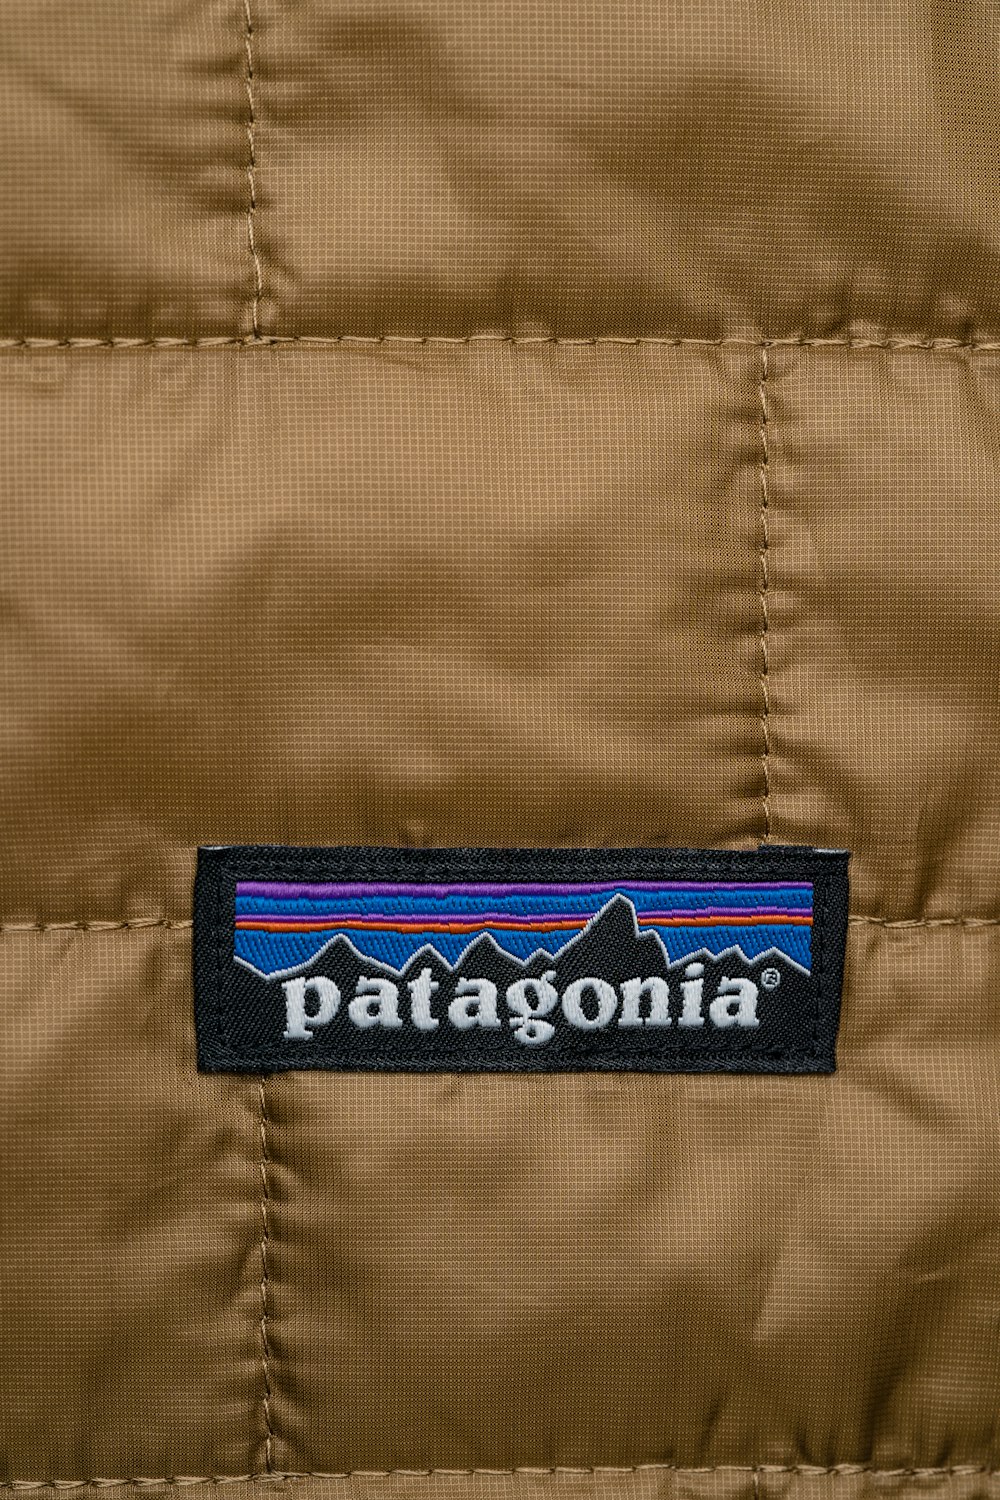 Who Does Patagonia Use For Shipping?